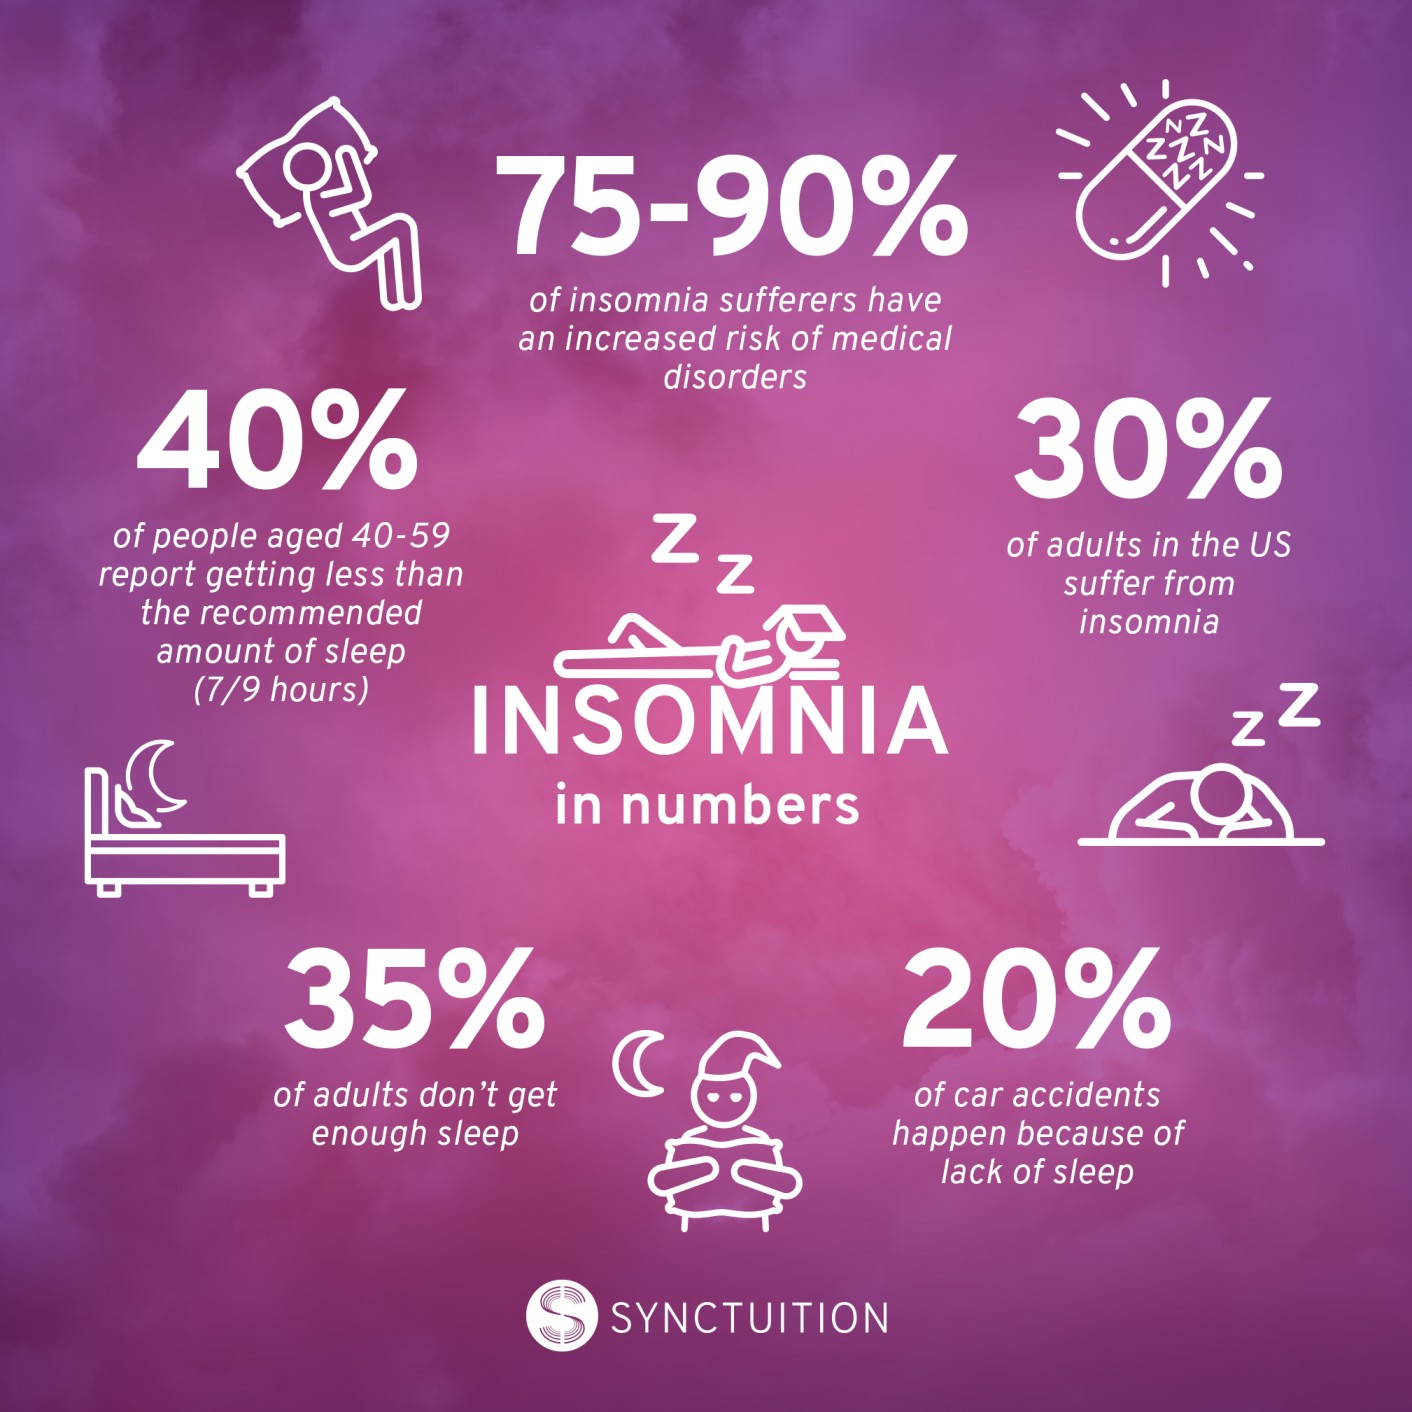 Statistics related to insomnia